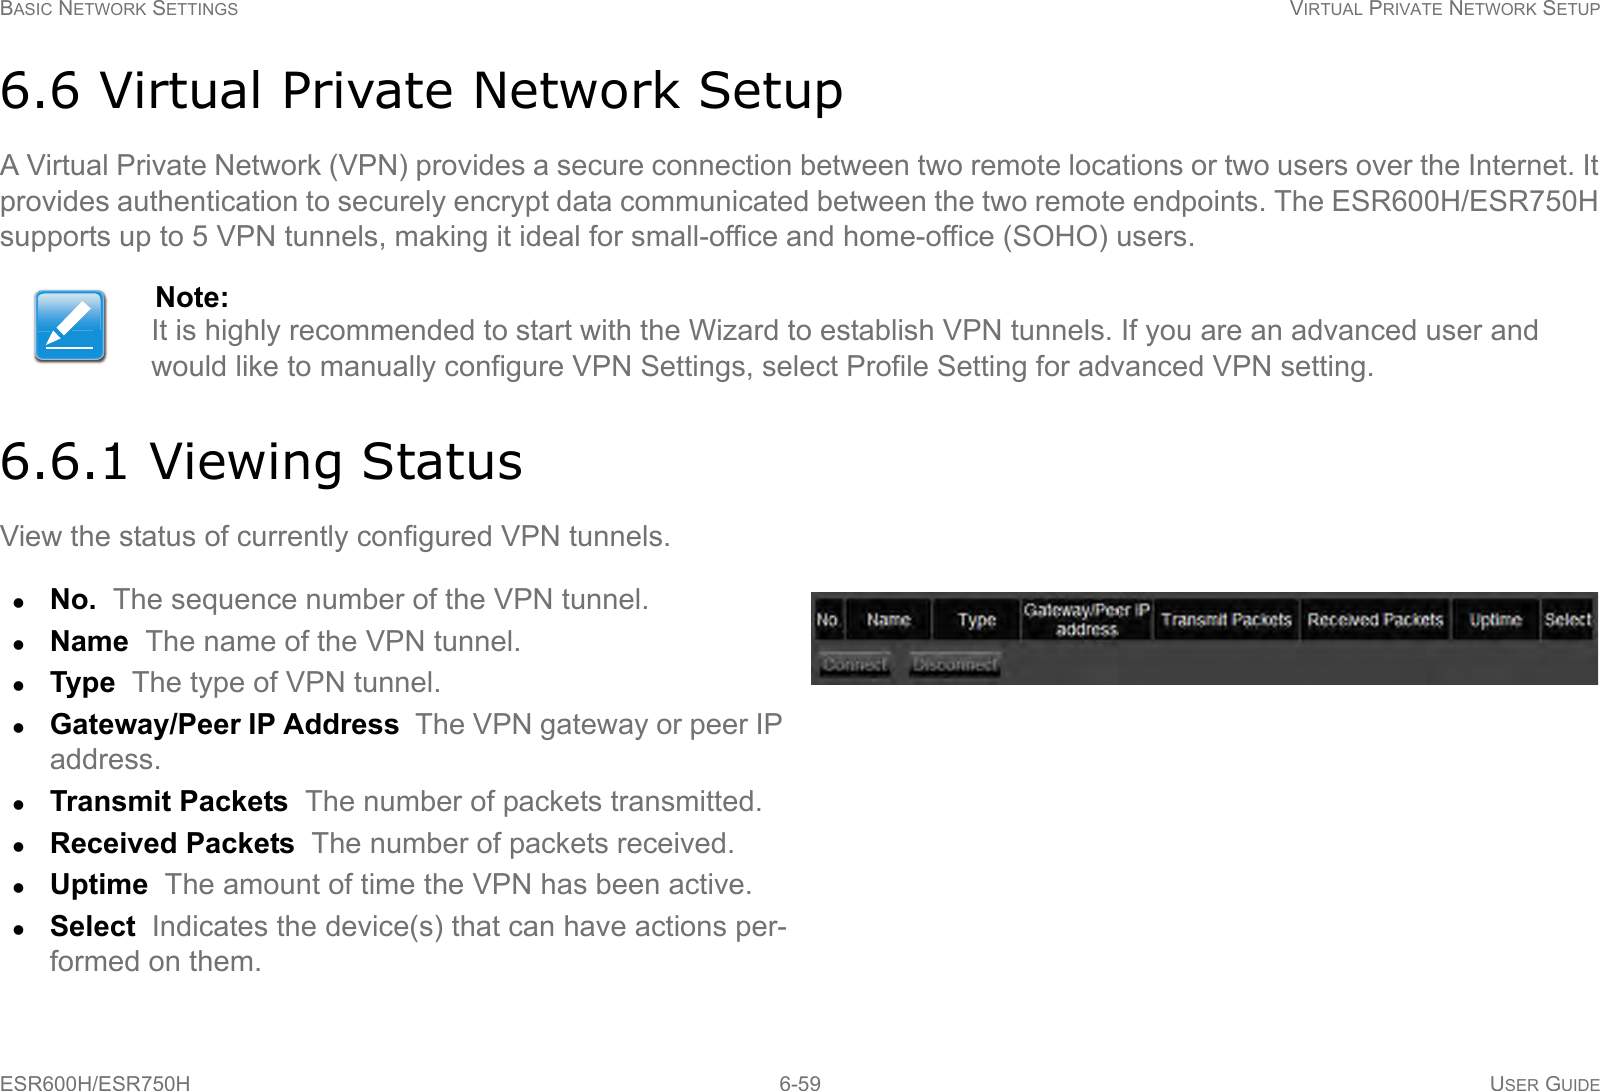 BASIC NETWORK SETTINGS VIRTUAL PRIVATE NETWORK SETUPESR600H/ESR750H 6-59 USER GUIDE6.6 Virtual Private Network SetupA Virtual Private Network (VPN) provides a secure connection between two remote locations or two users over the Internet. It provides authentication to securely encrypt data communicated between the two remote endpoints. The ESR600H/ESR750H supports up to 5 VPN tunnels, making it ideal for small-office and home-office (SOHO) users.6.6.1 Viewing StatusView the status of currently configured VPN tunnels.Note:It is highly recommended to start with the Wizard to establish VPN tunnels. If you are an advanced user and would like to manually configure VPN Settings, select Profile Setting for advanced VPN setting.No.  The sequence number of the VPN tunnel.Name  The name of the VPN tunnel.Type  The type of VPN tunnel.Gateway/Peer IP Address  The VPN gateway or peer IP address.Transmit Packets  The number of packets transmitted.Received Packets  The number of packets received.Uptime  The amount of time the VPN has been active.Select  Indicates the device(s) that can have actions per-formed on them.